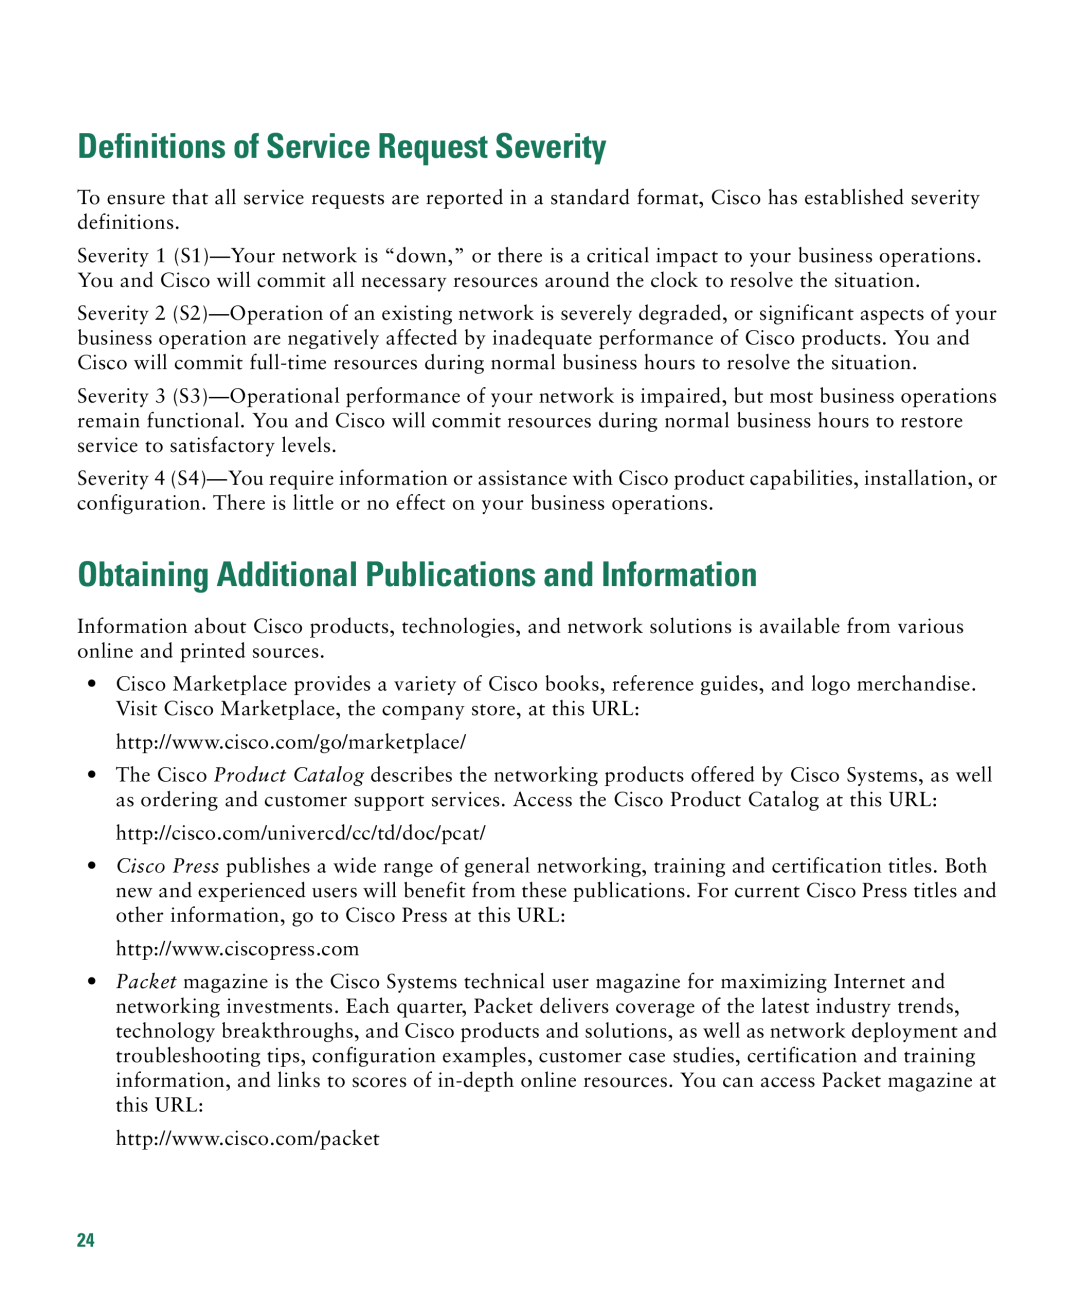 Cisco Systems CATALYST 2950 Definitions of Service Request Severity, Obtaining Additional Publications and Information 